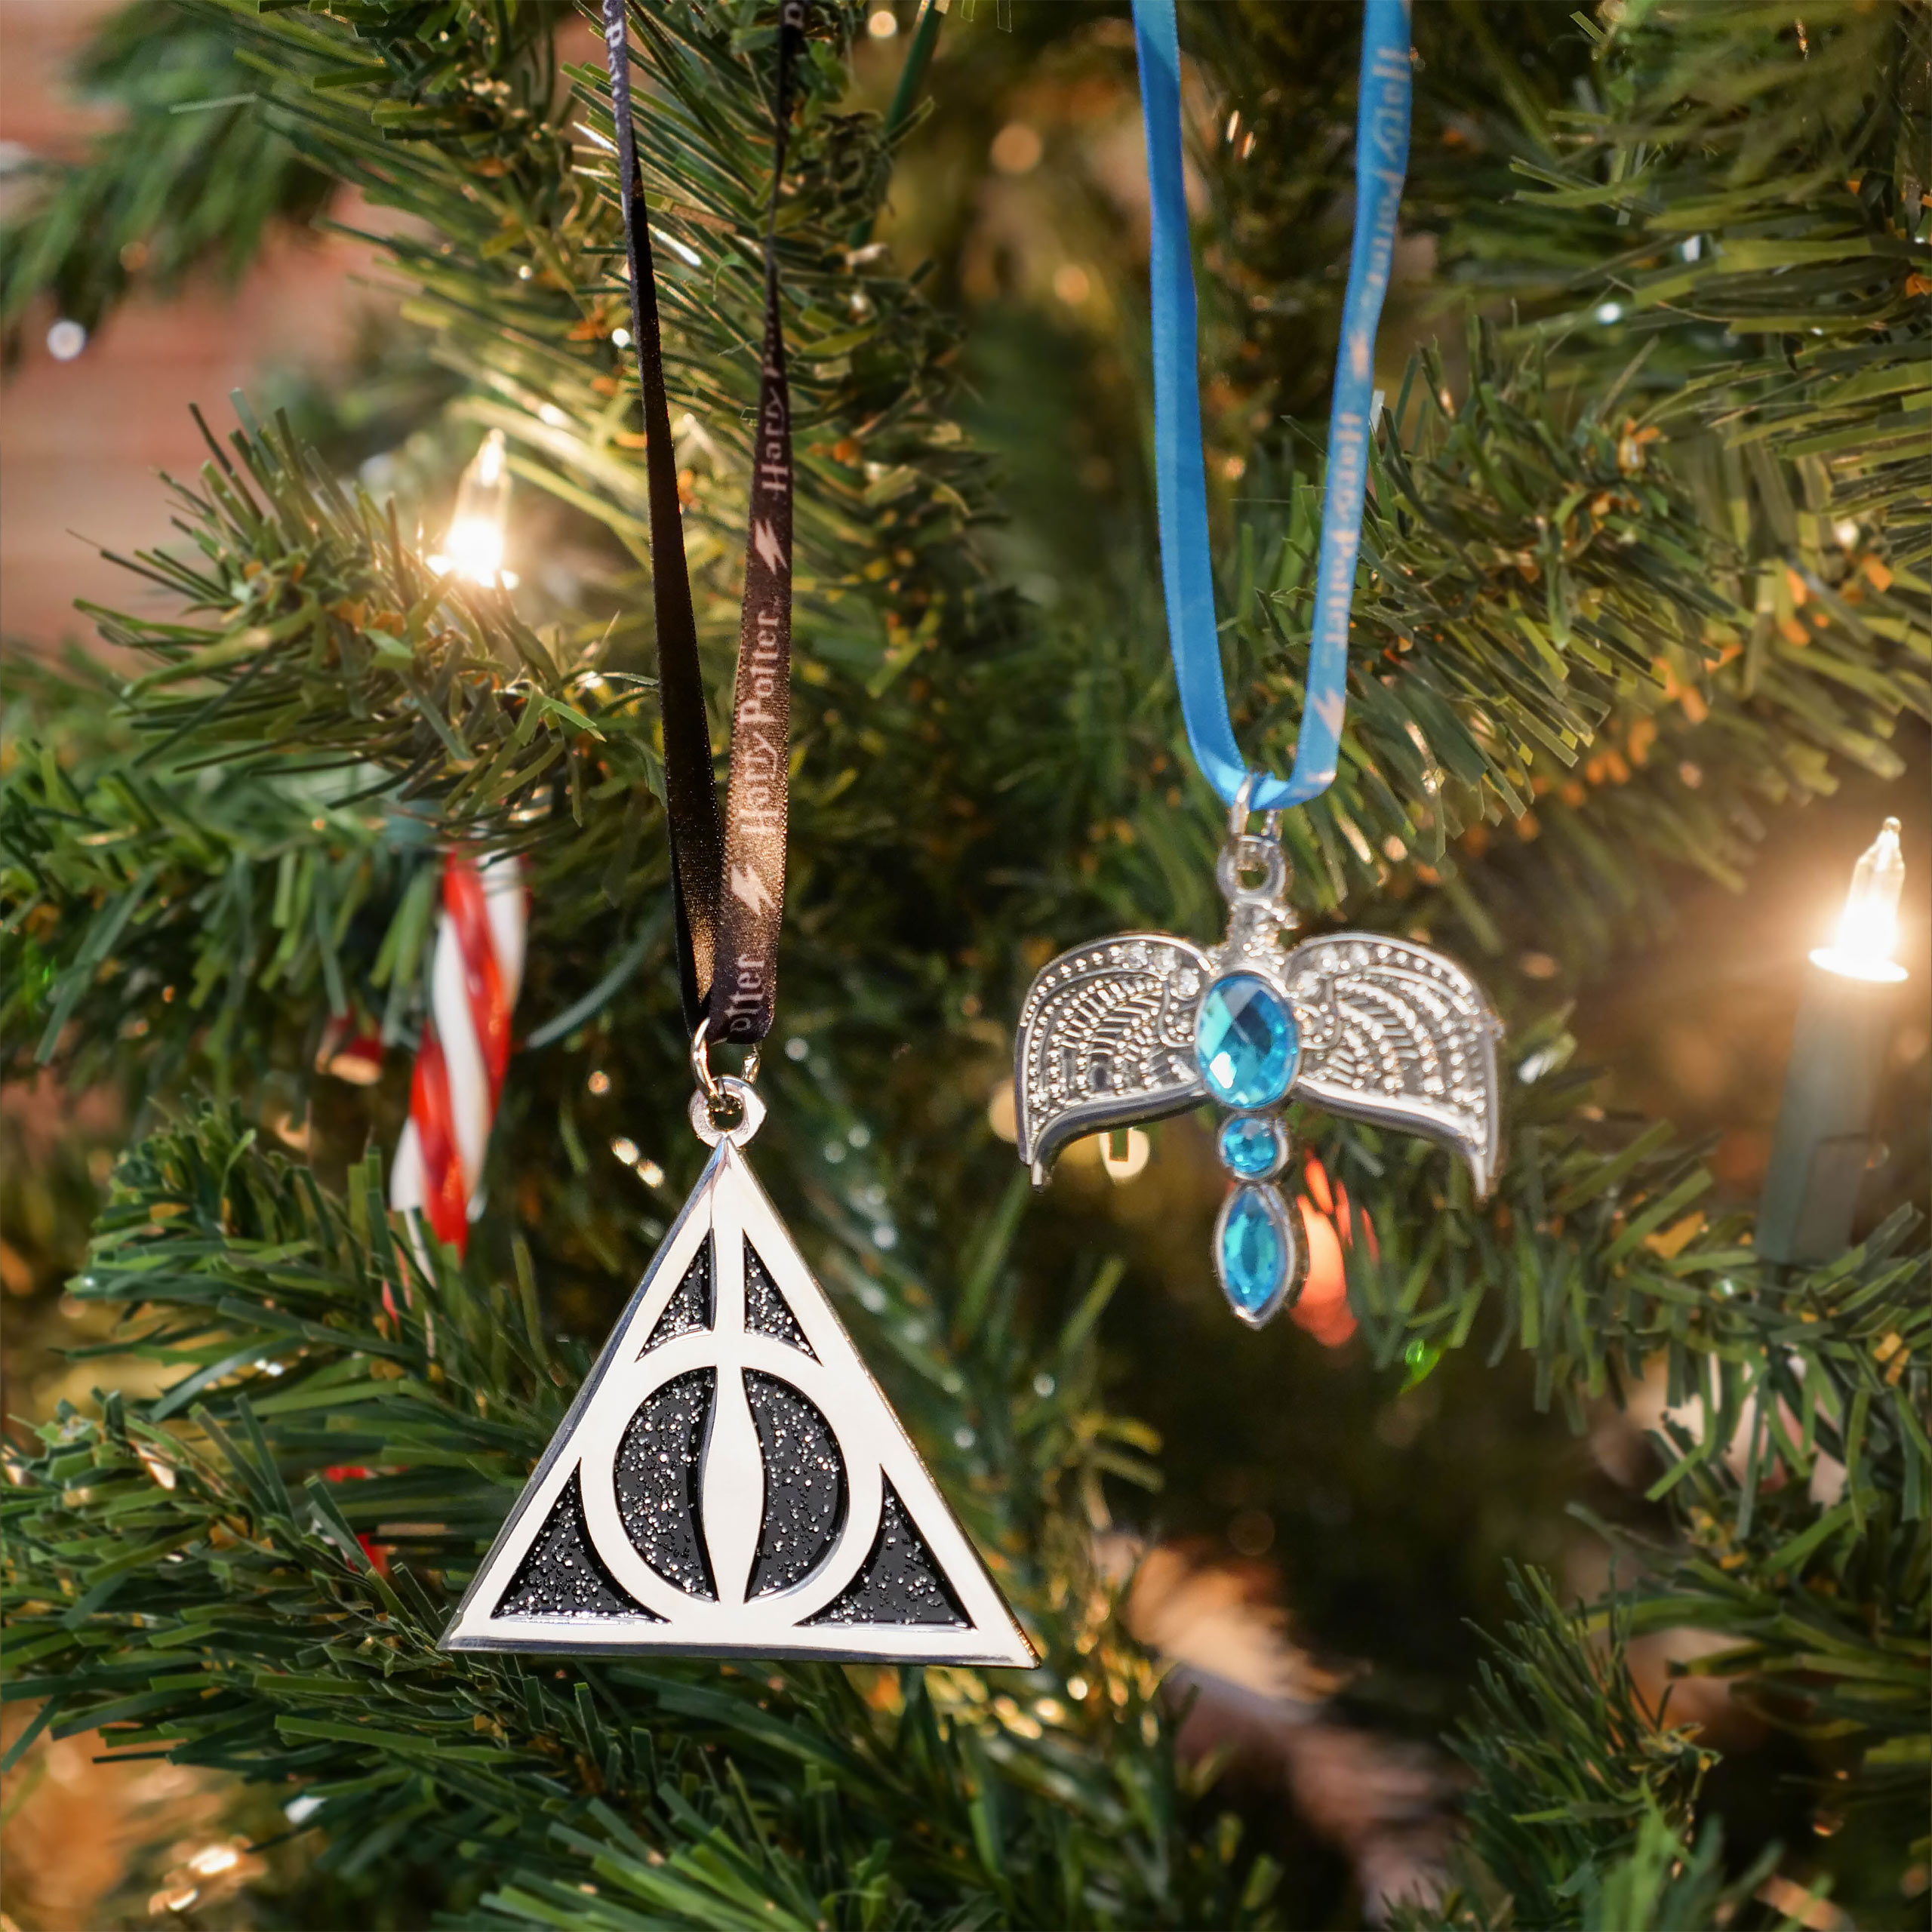 Harry Potter - Deathly Hallows Christmas tree ornament